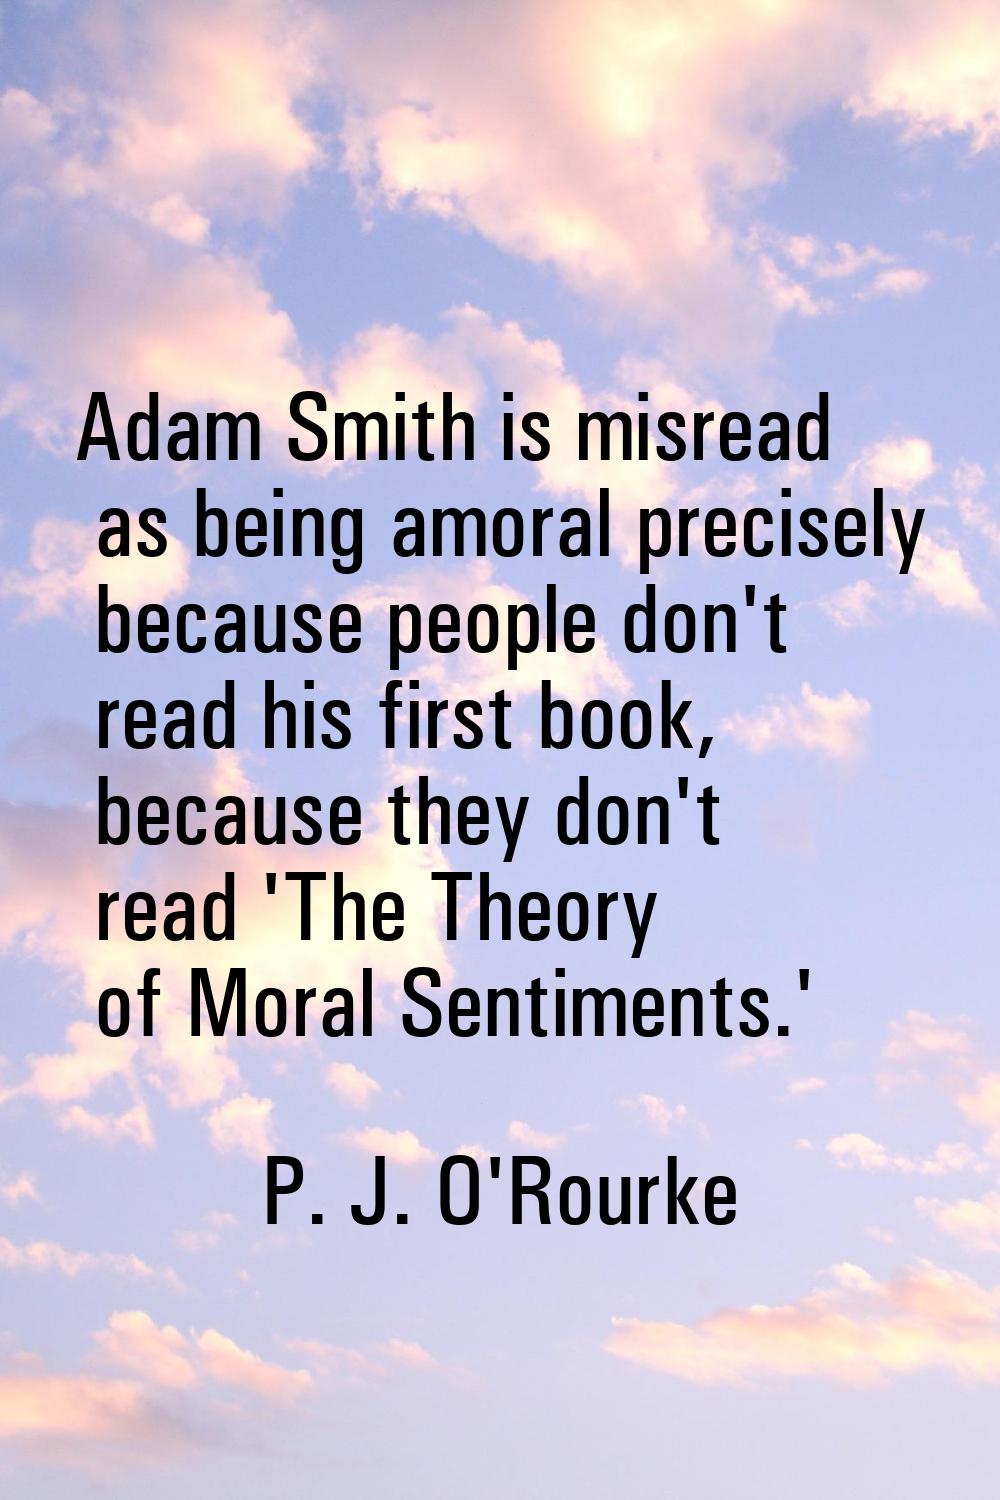 Adam Smith is misread as being amoral precisely because people don't read his first book, because t